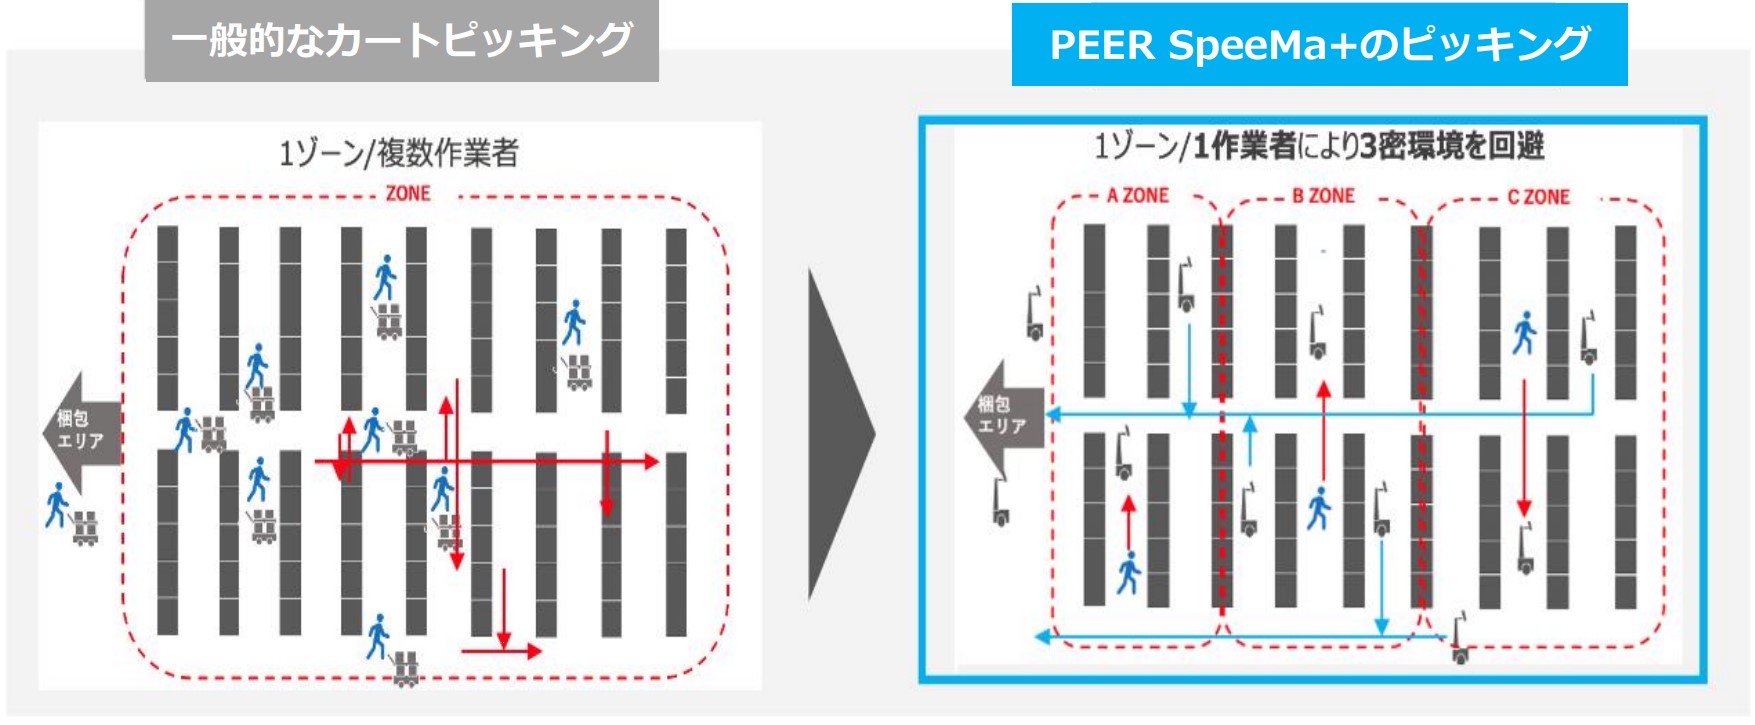 PEER SpeeMa robot front and back image